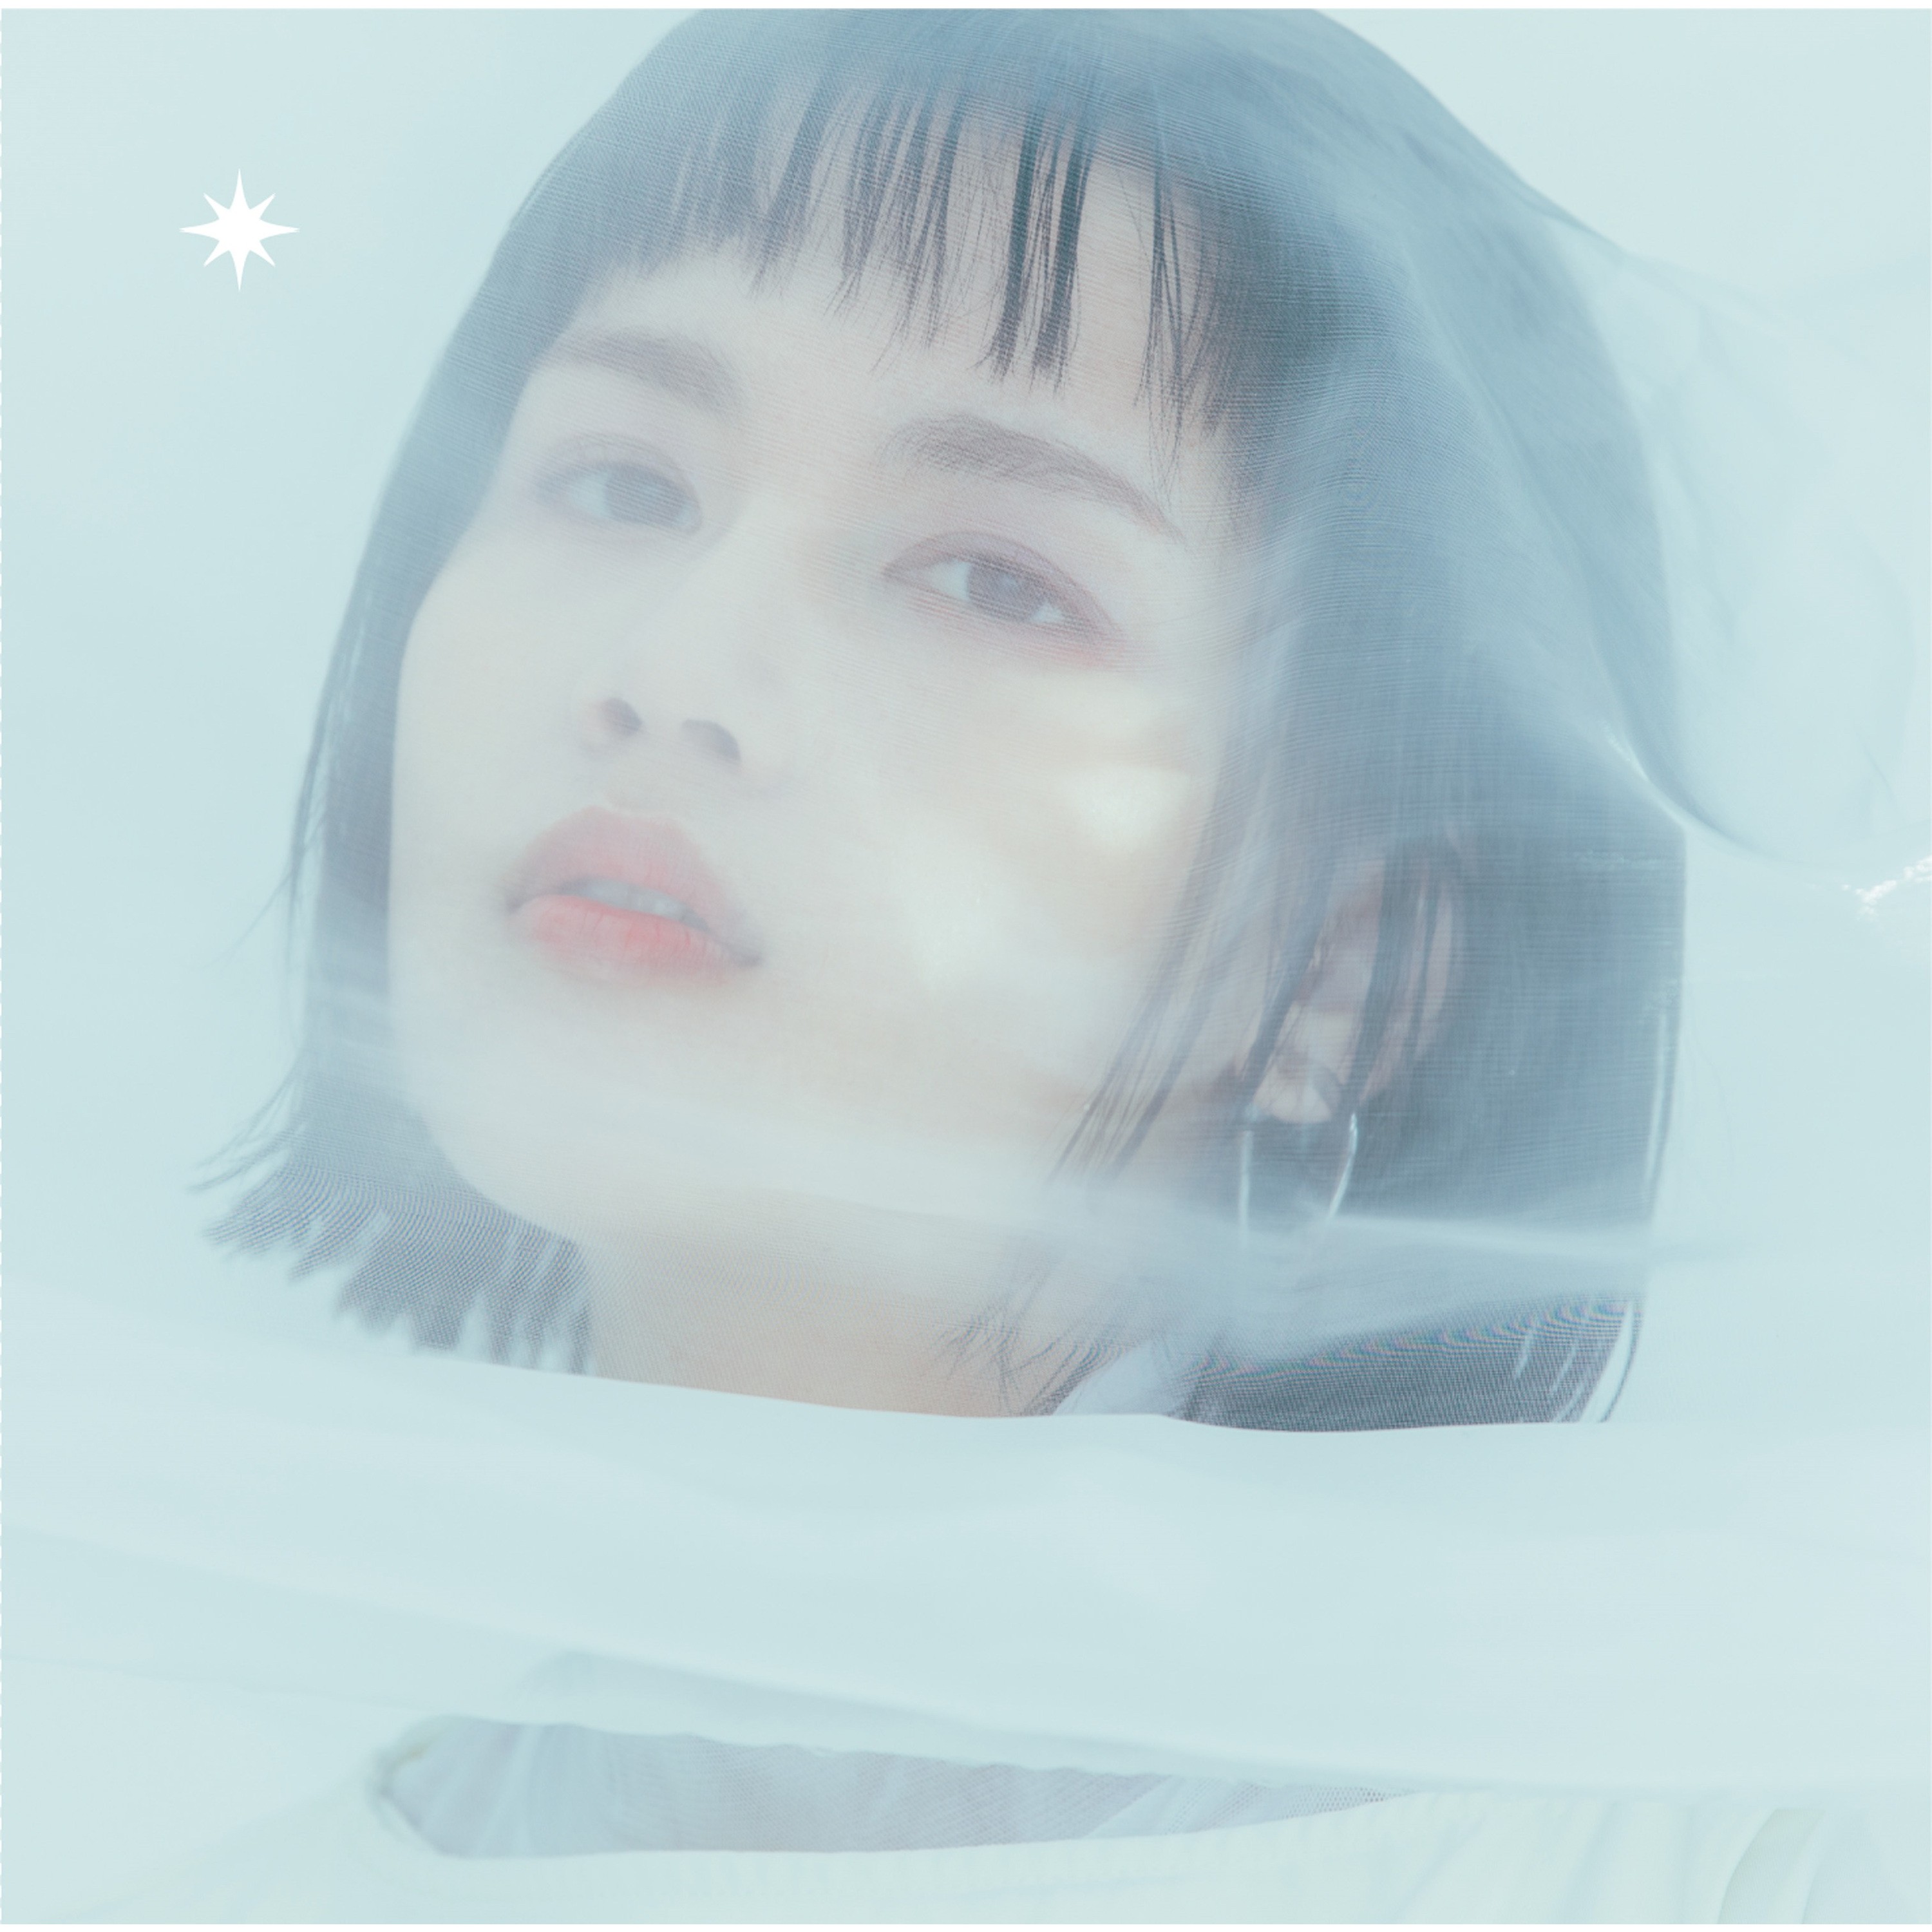 Anly – 星瞬～Star Wink～ [FLAC / 24bit Lossless / WEB] [2021.01.06]